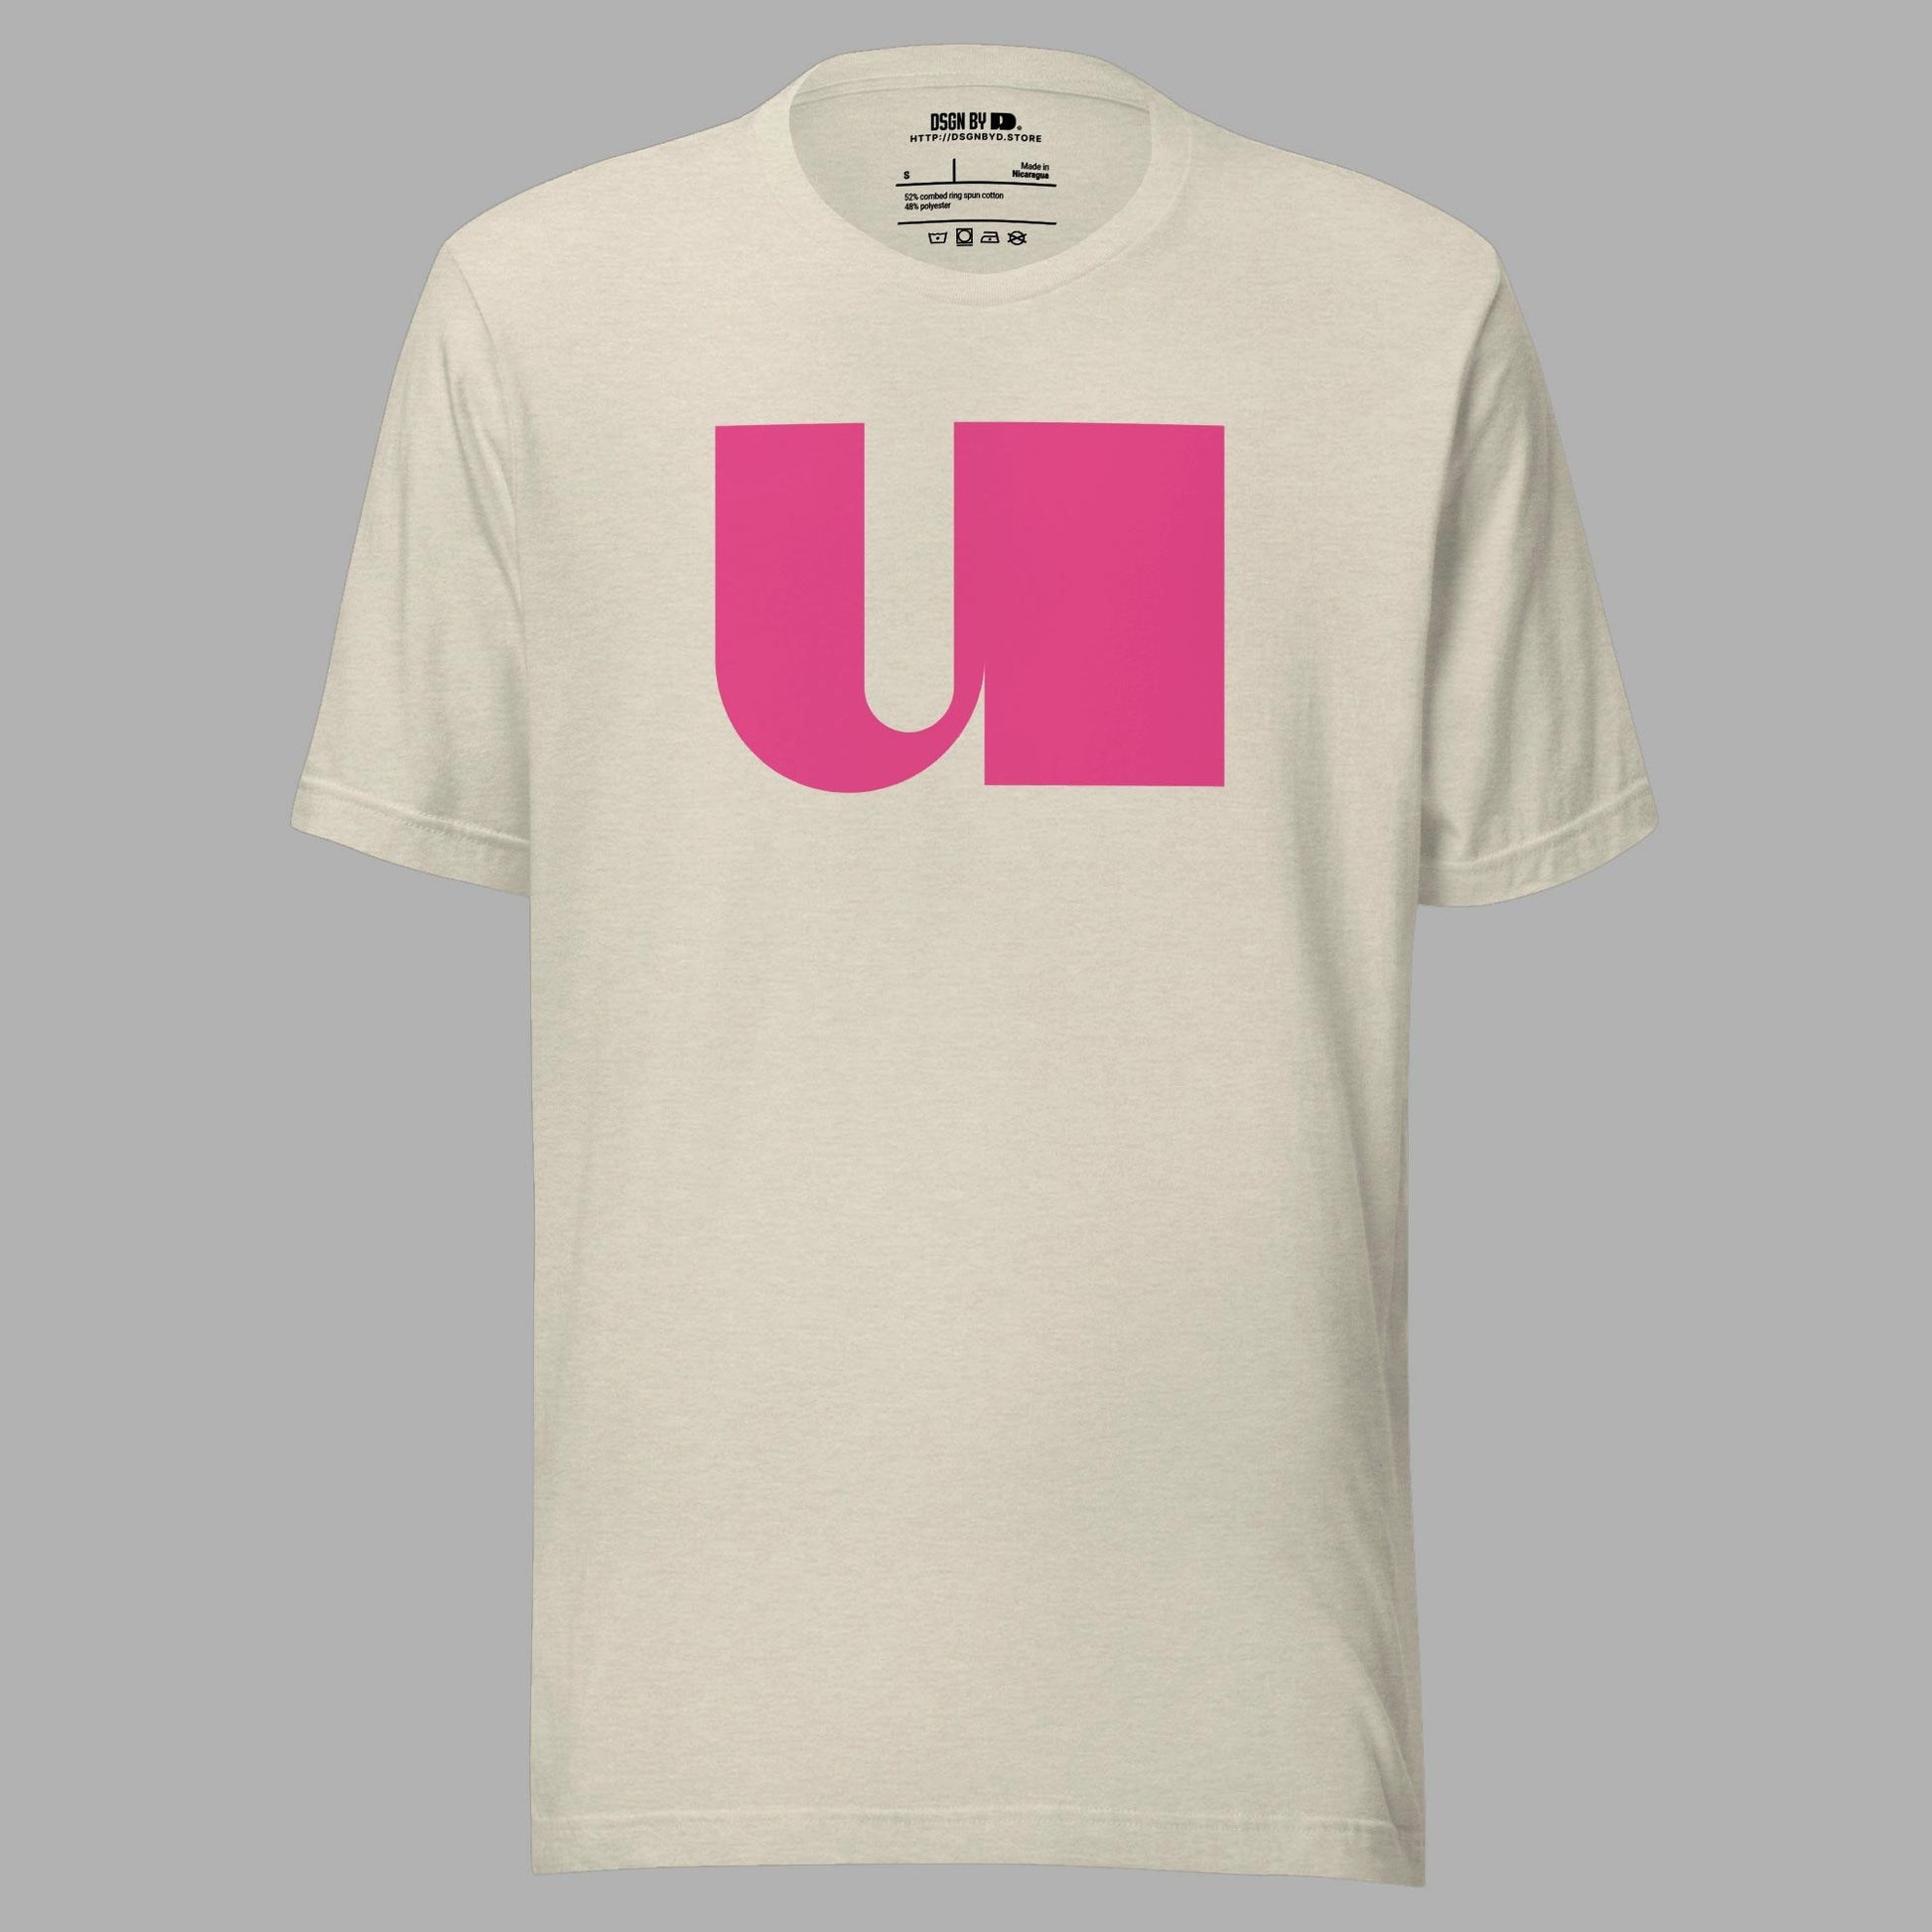 A beige cotton unisex graphic tee with letter U.